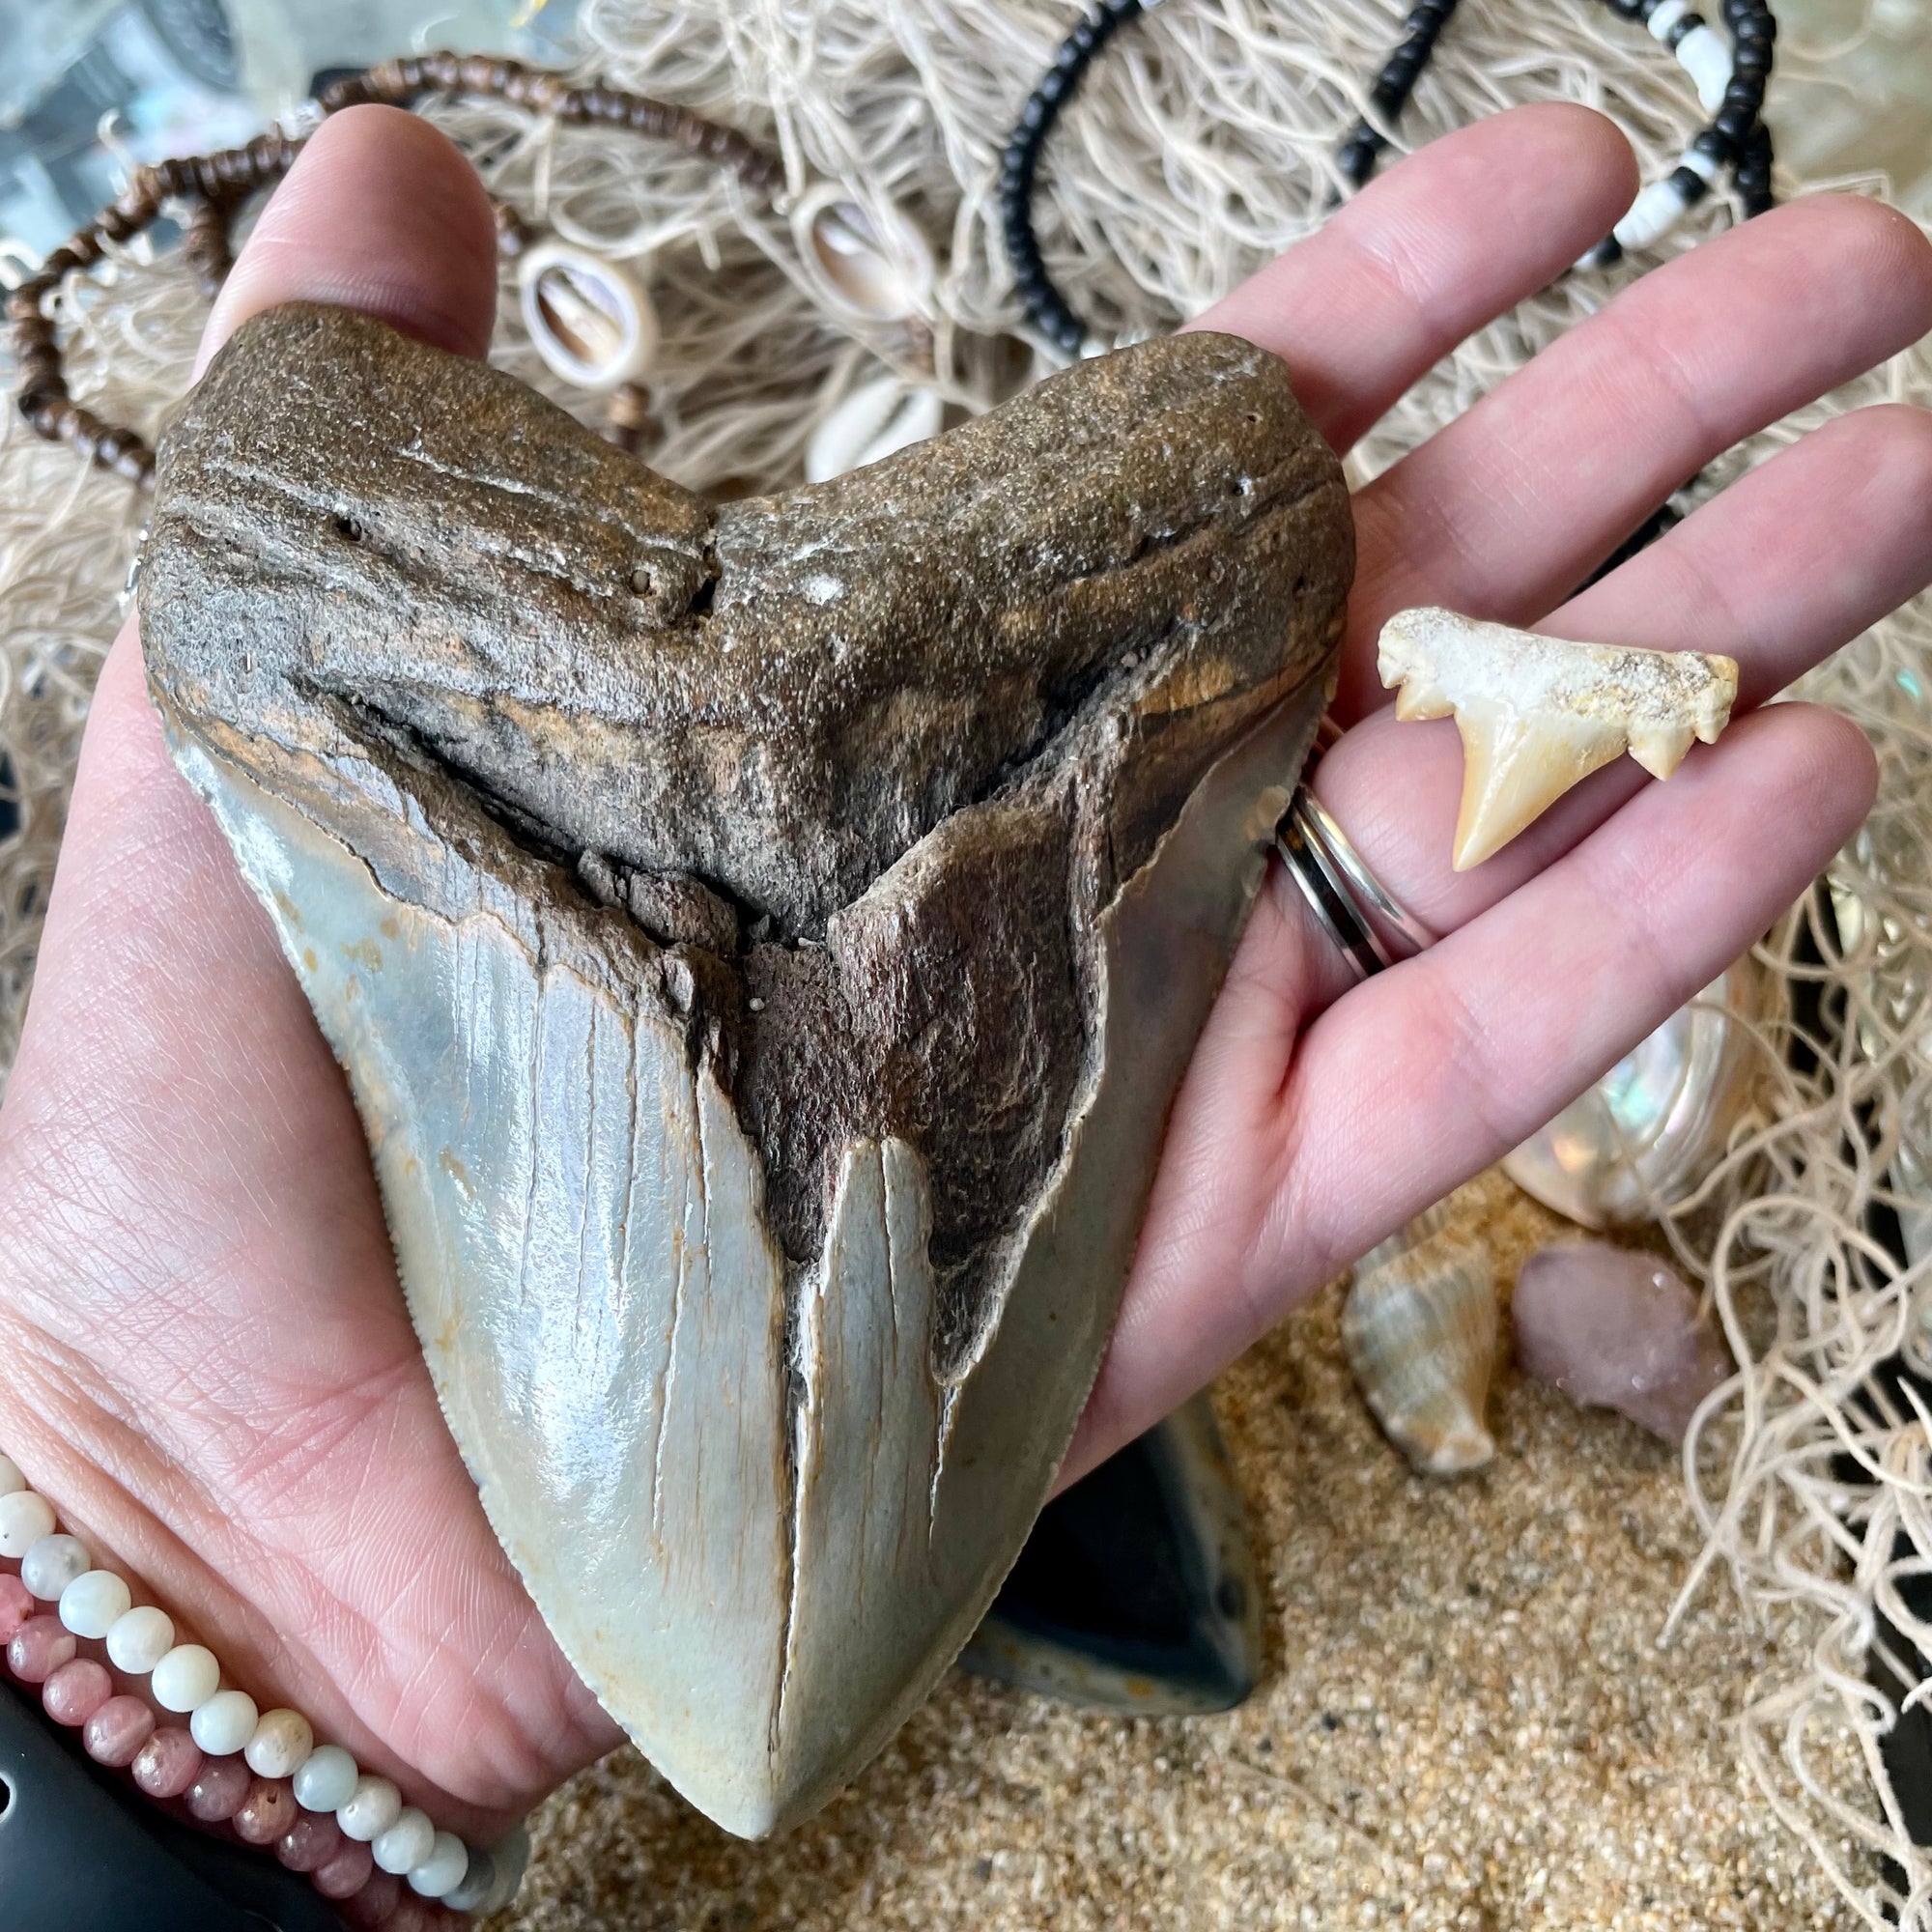 Megalodon Tooth Natural Fossil